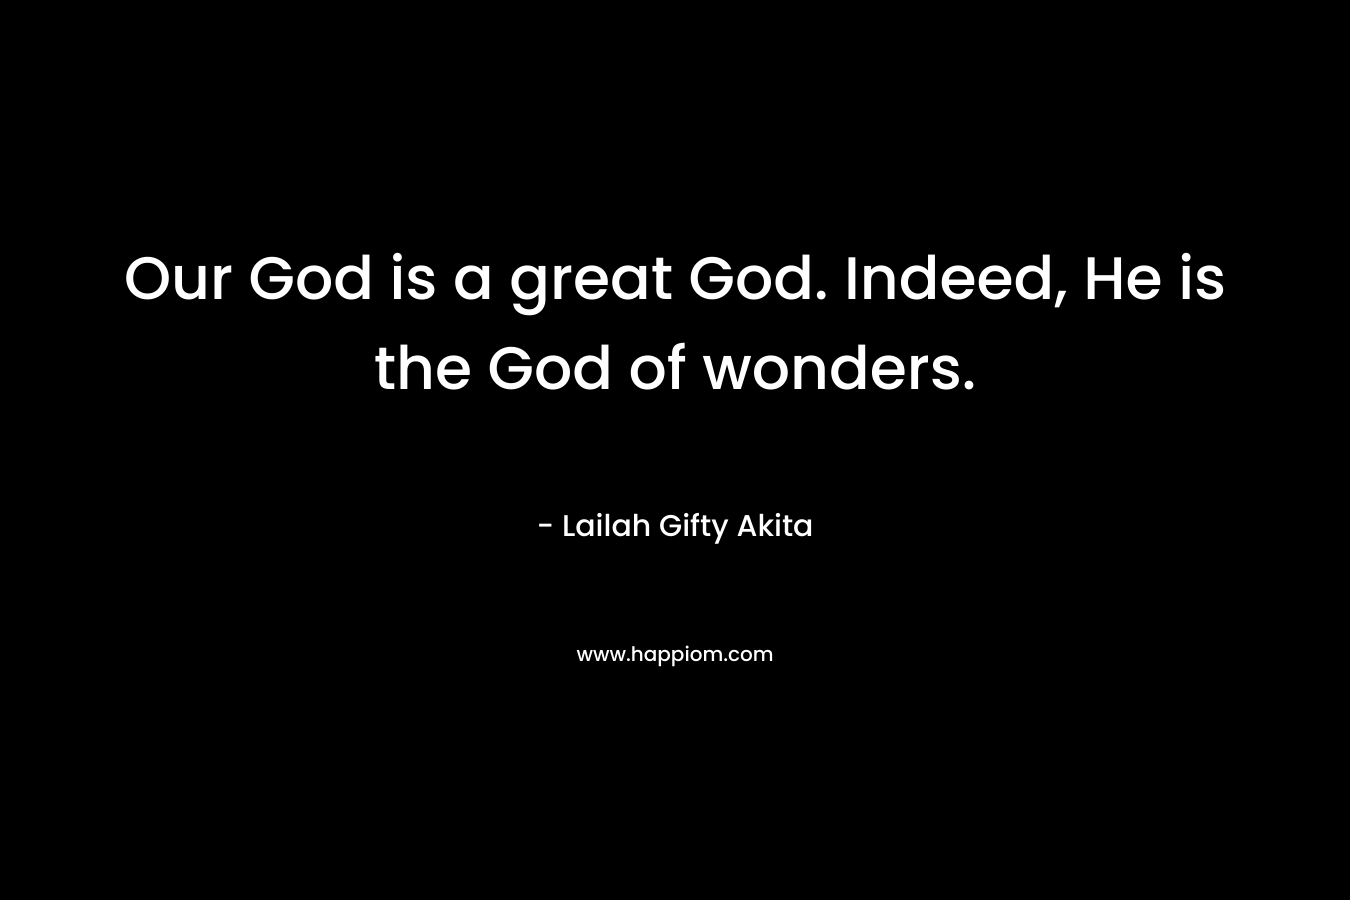 Our God is a great God. Indeed, He is the God of wonders.